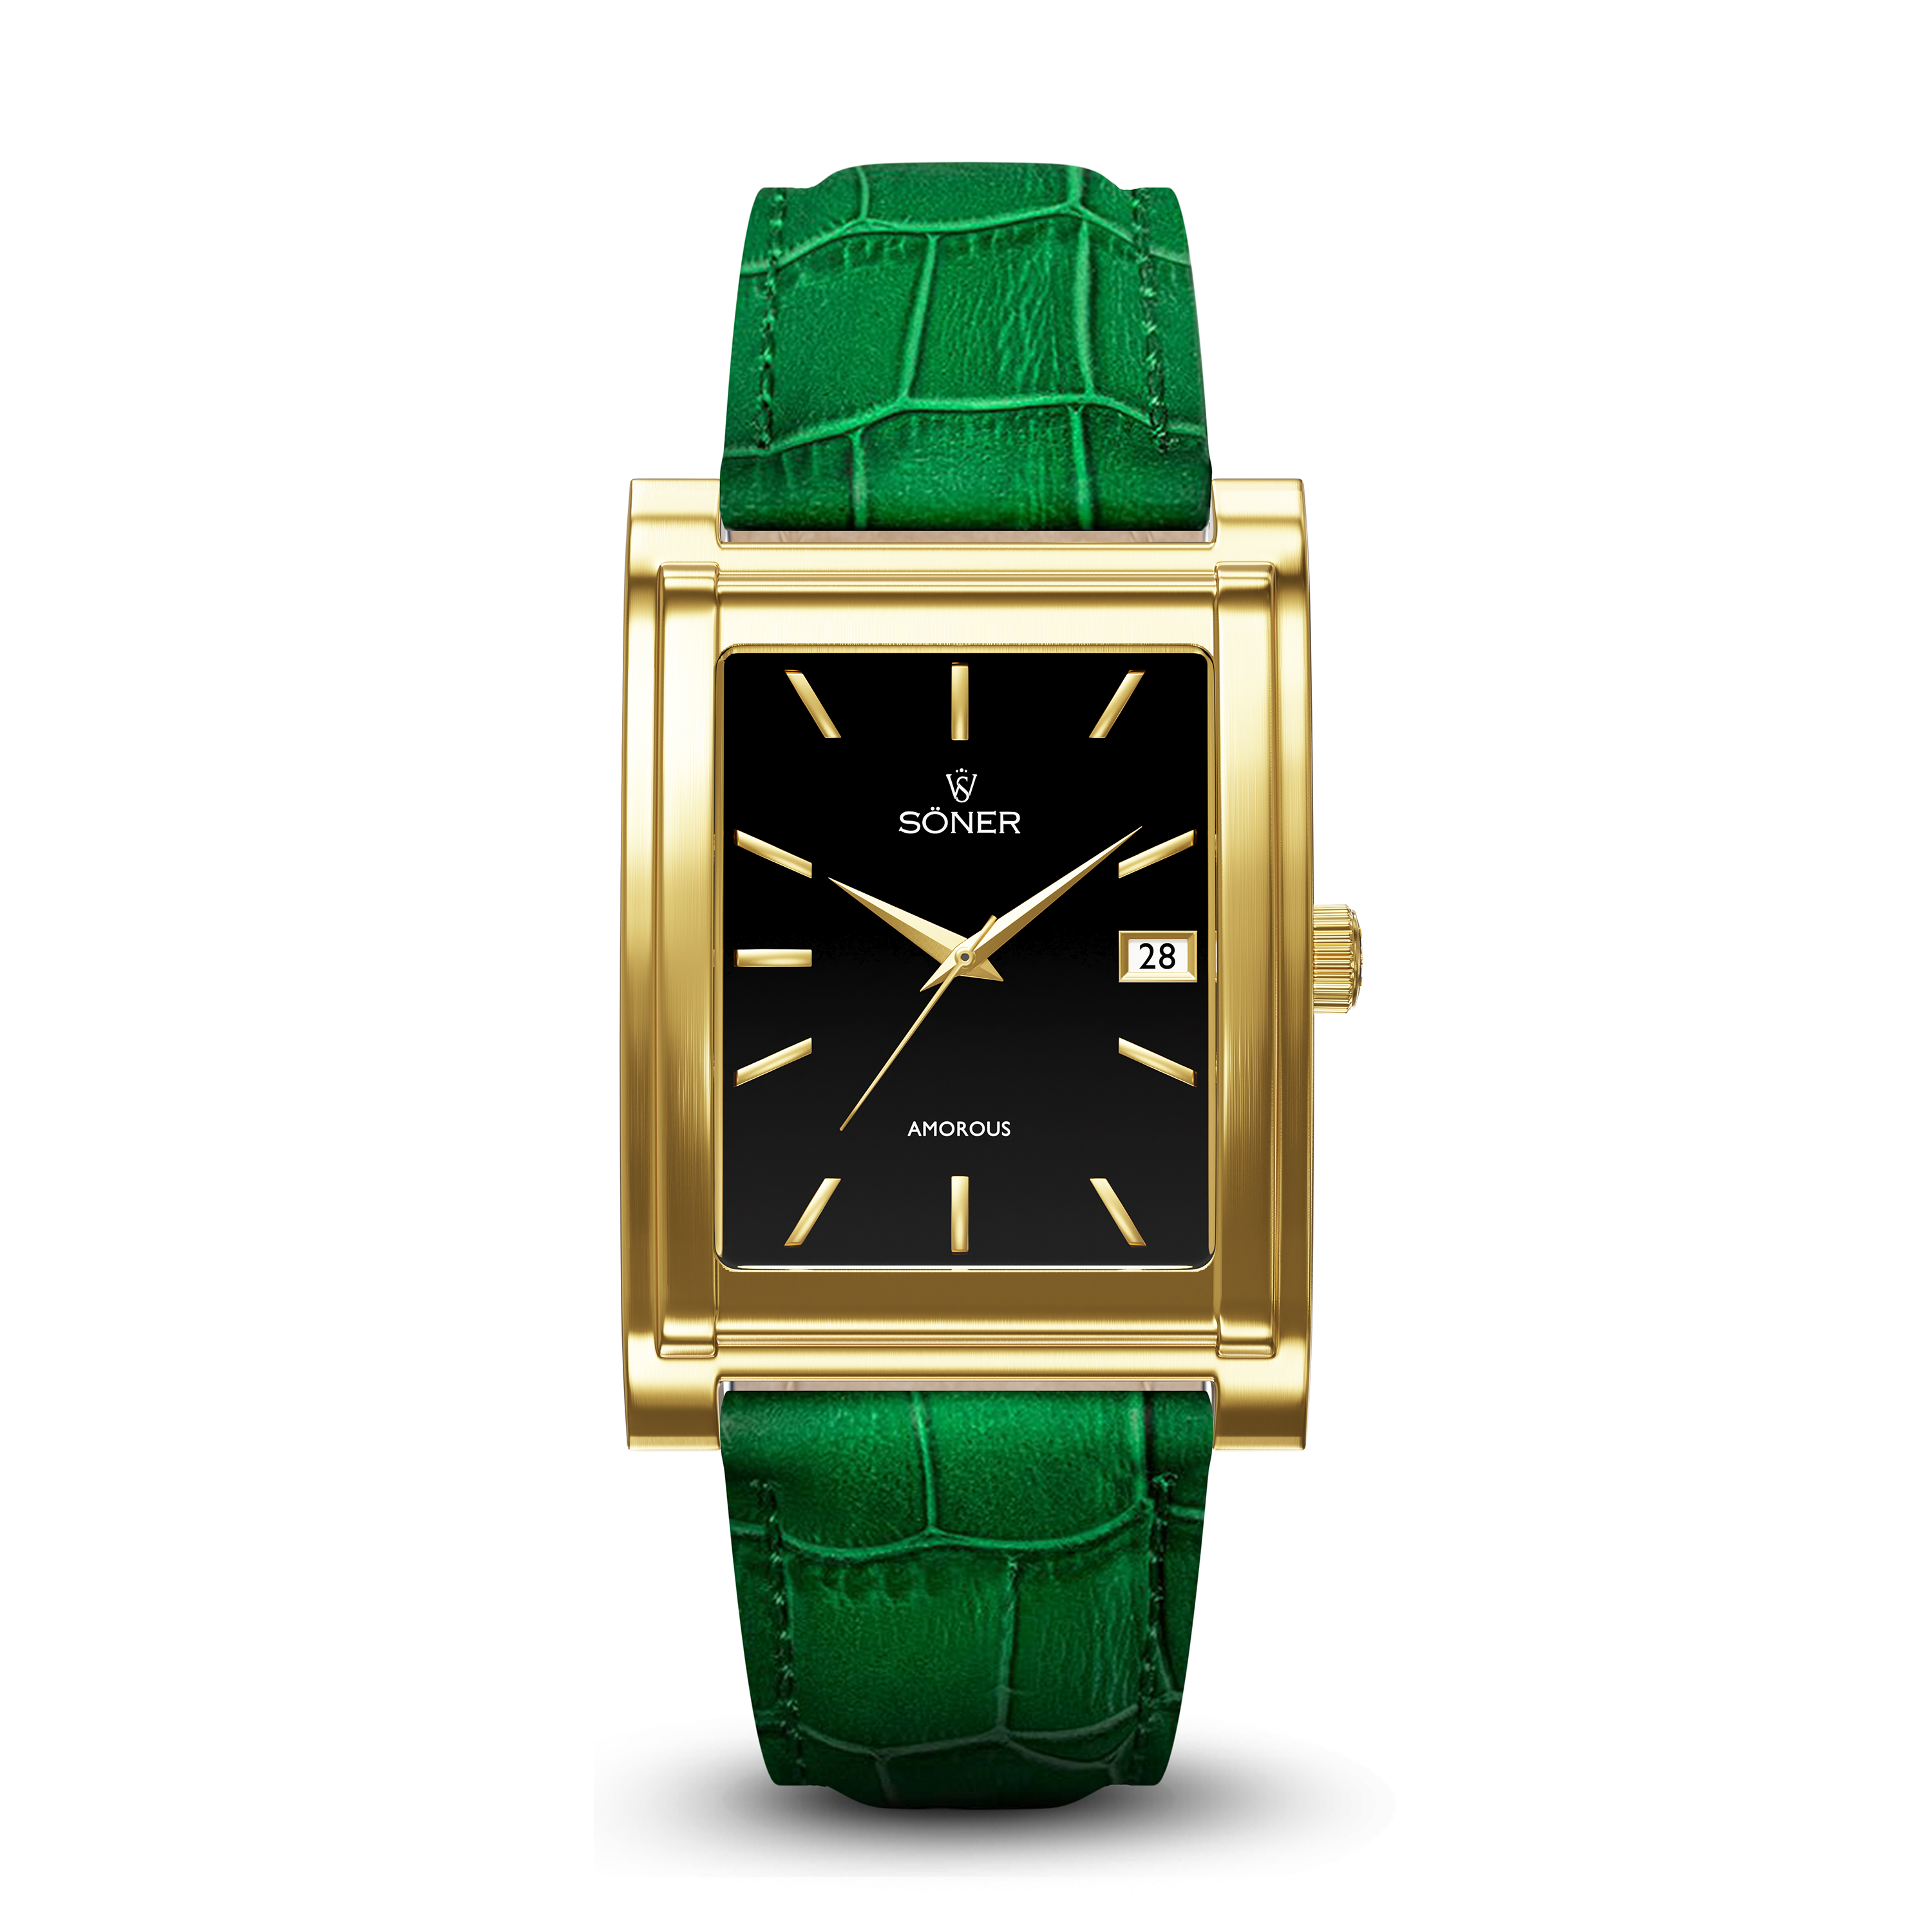 Square automatic watch, Amorous Milano with black dial - green alligator pattern leather strap front view